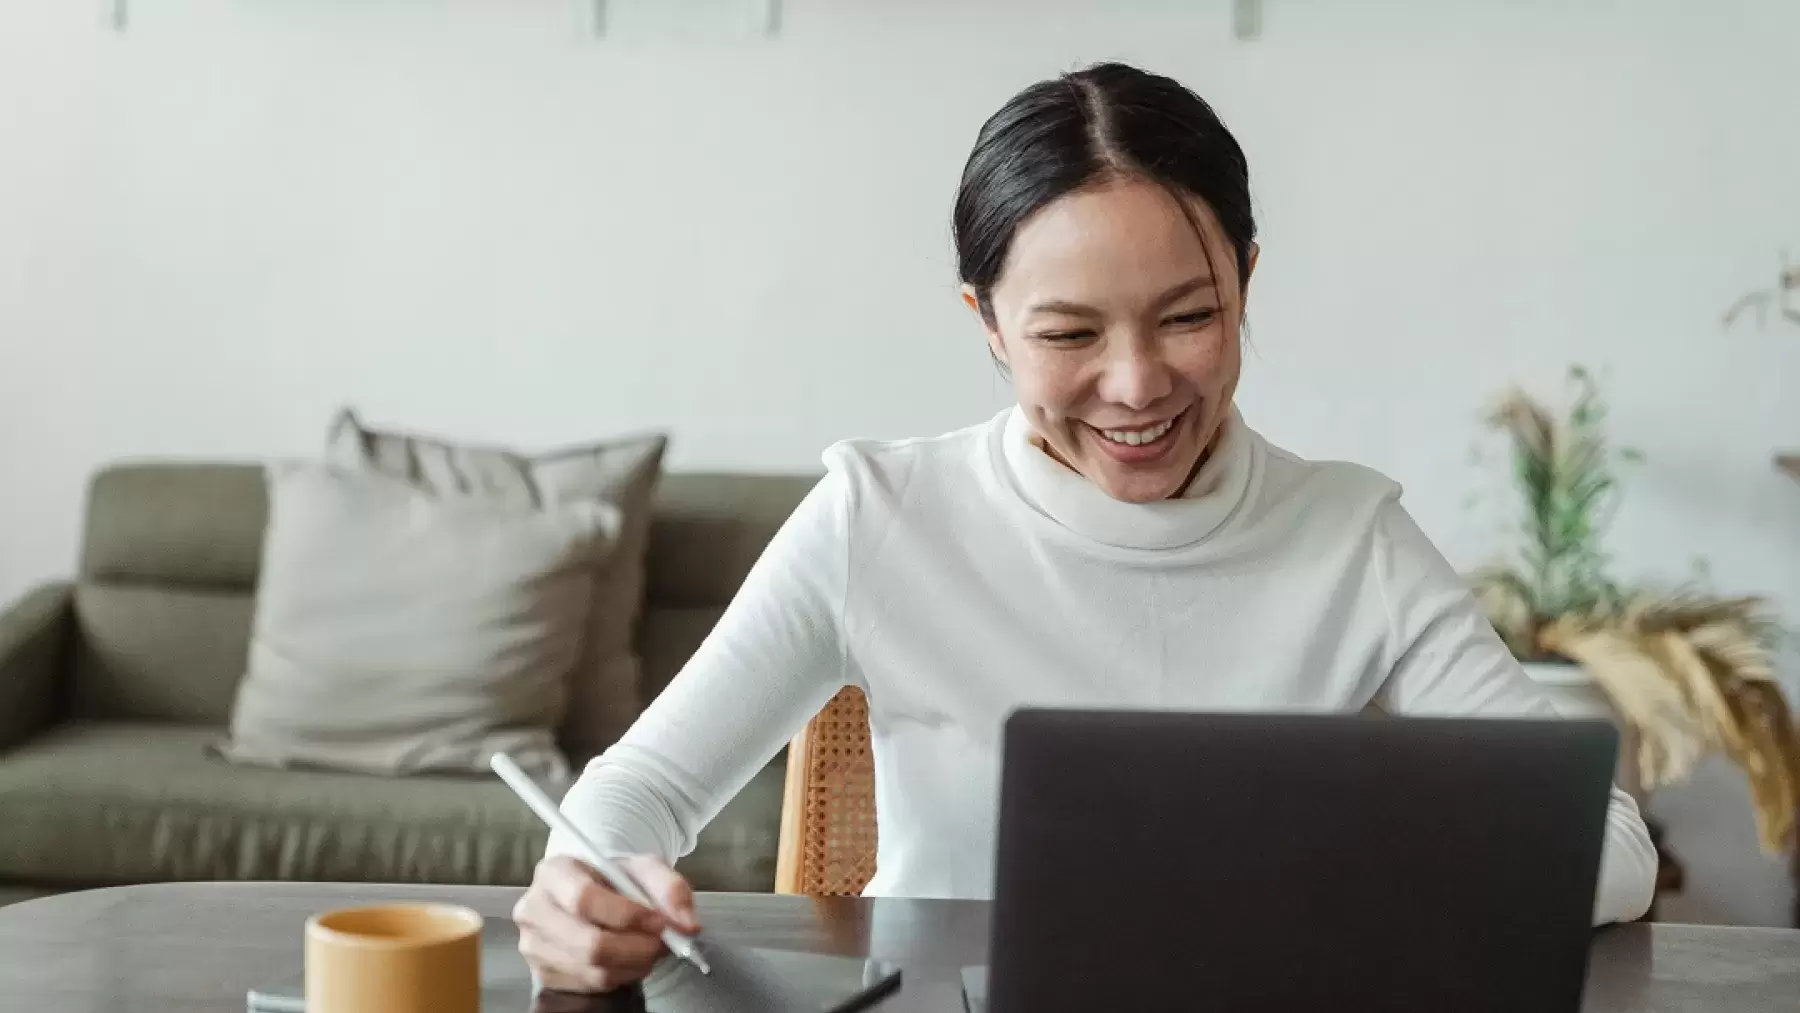 Woman with white turtleneck smiling and looking at computer screen while writing on a pad.